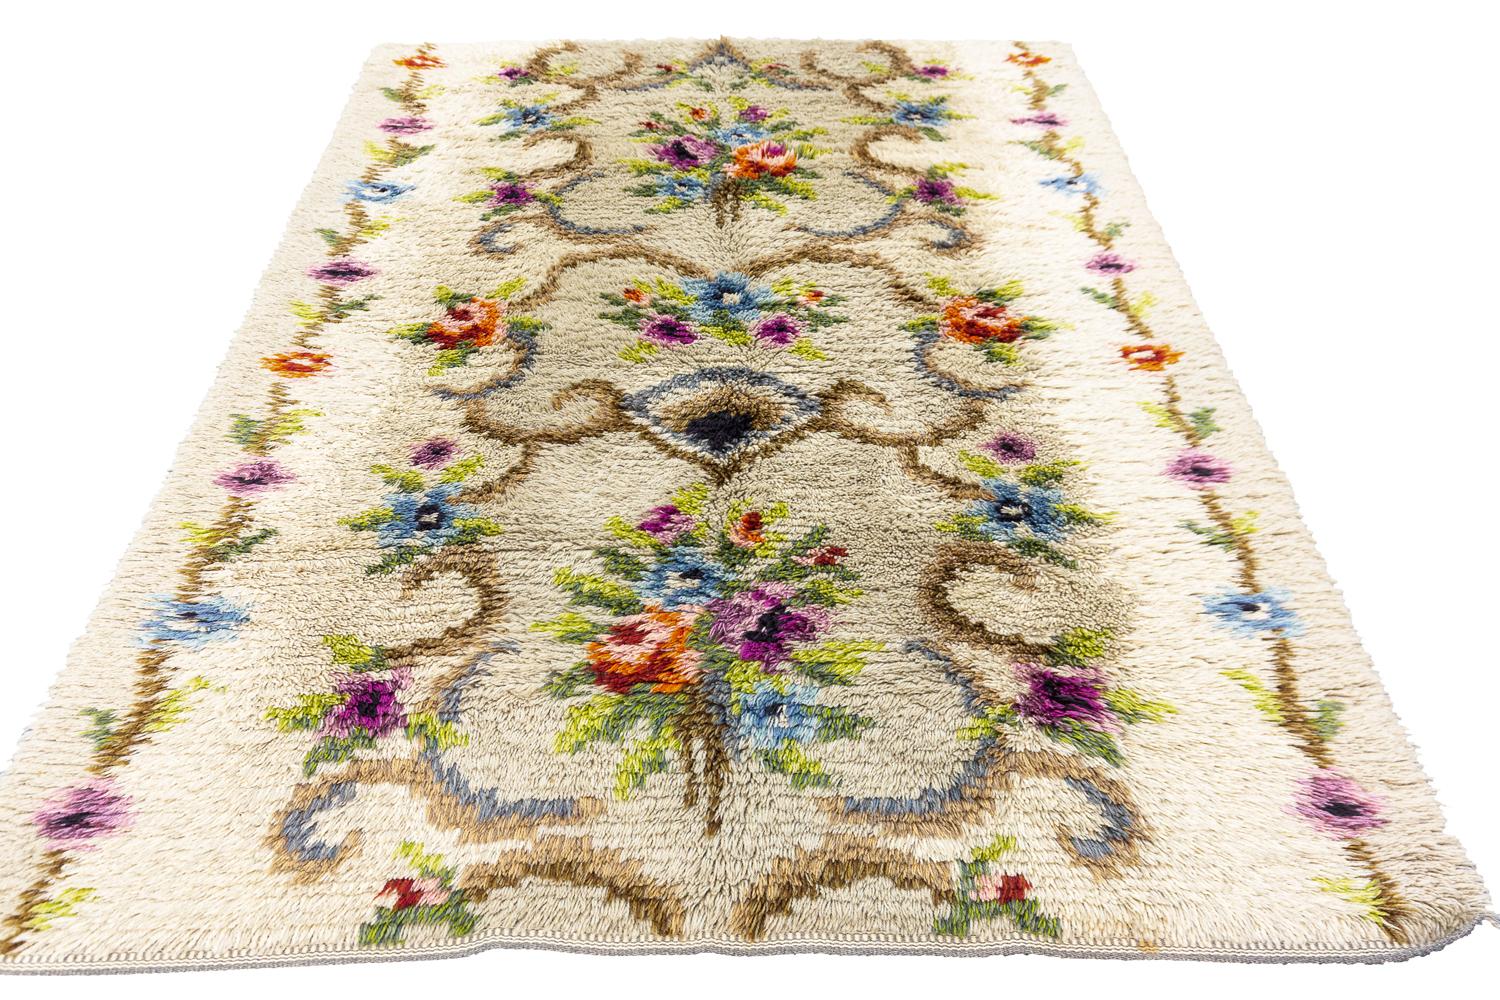 This is a vintage Swedish rug woven during the mid-20th century circa 1950 – 1970’s and measures 200 x 145 CM in size. This rug has an all-over floral design with two bouquets enclosed within connecting hooks. It has polychrome flowers which are set